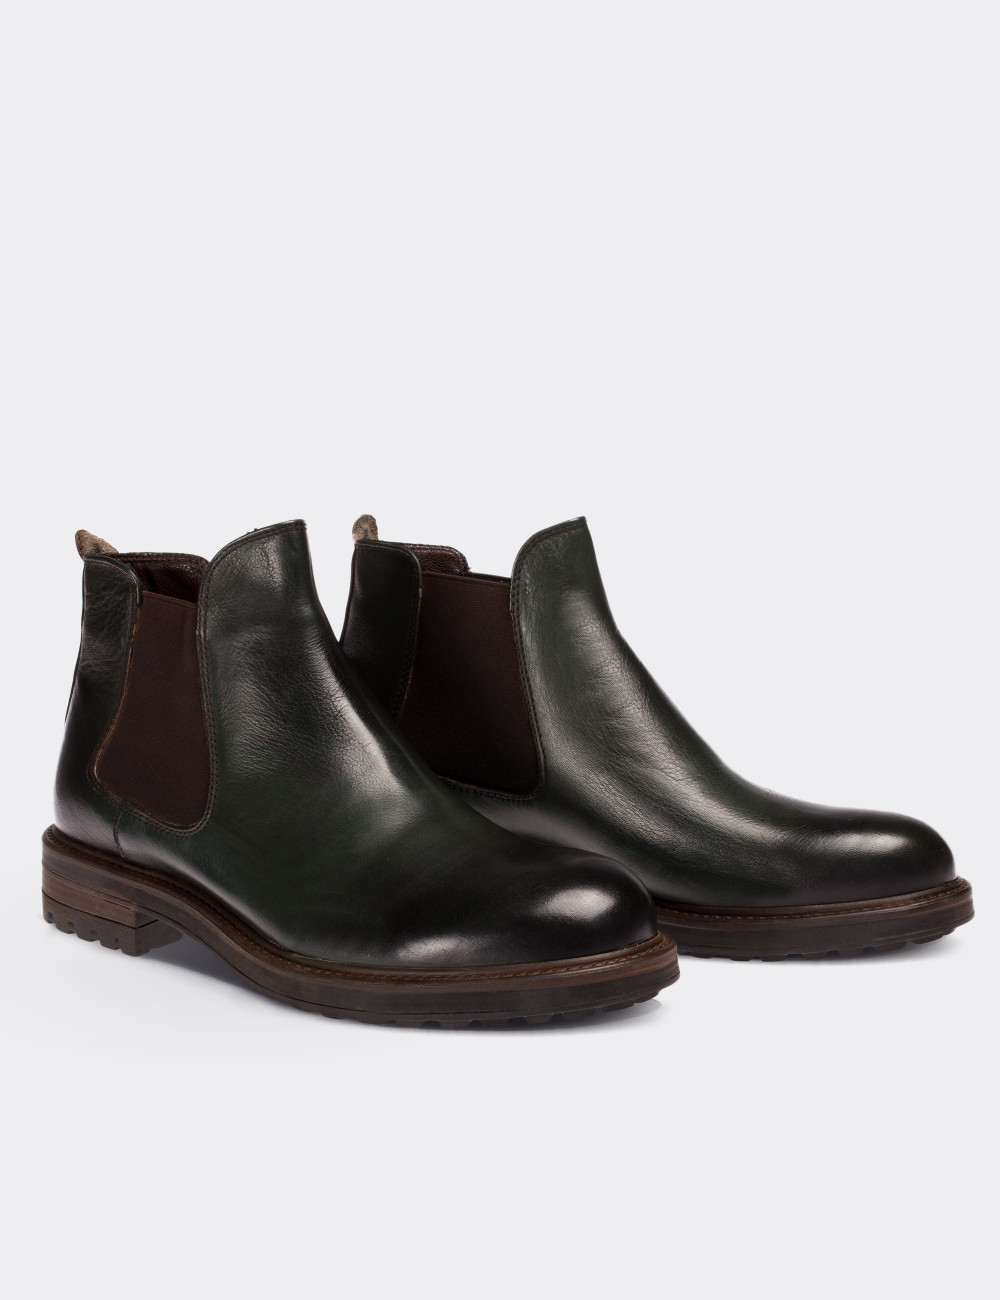 Green  Leather Vintage Chelsea Boots - 01620MYSLC03